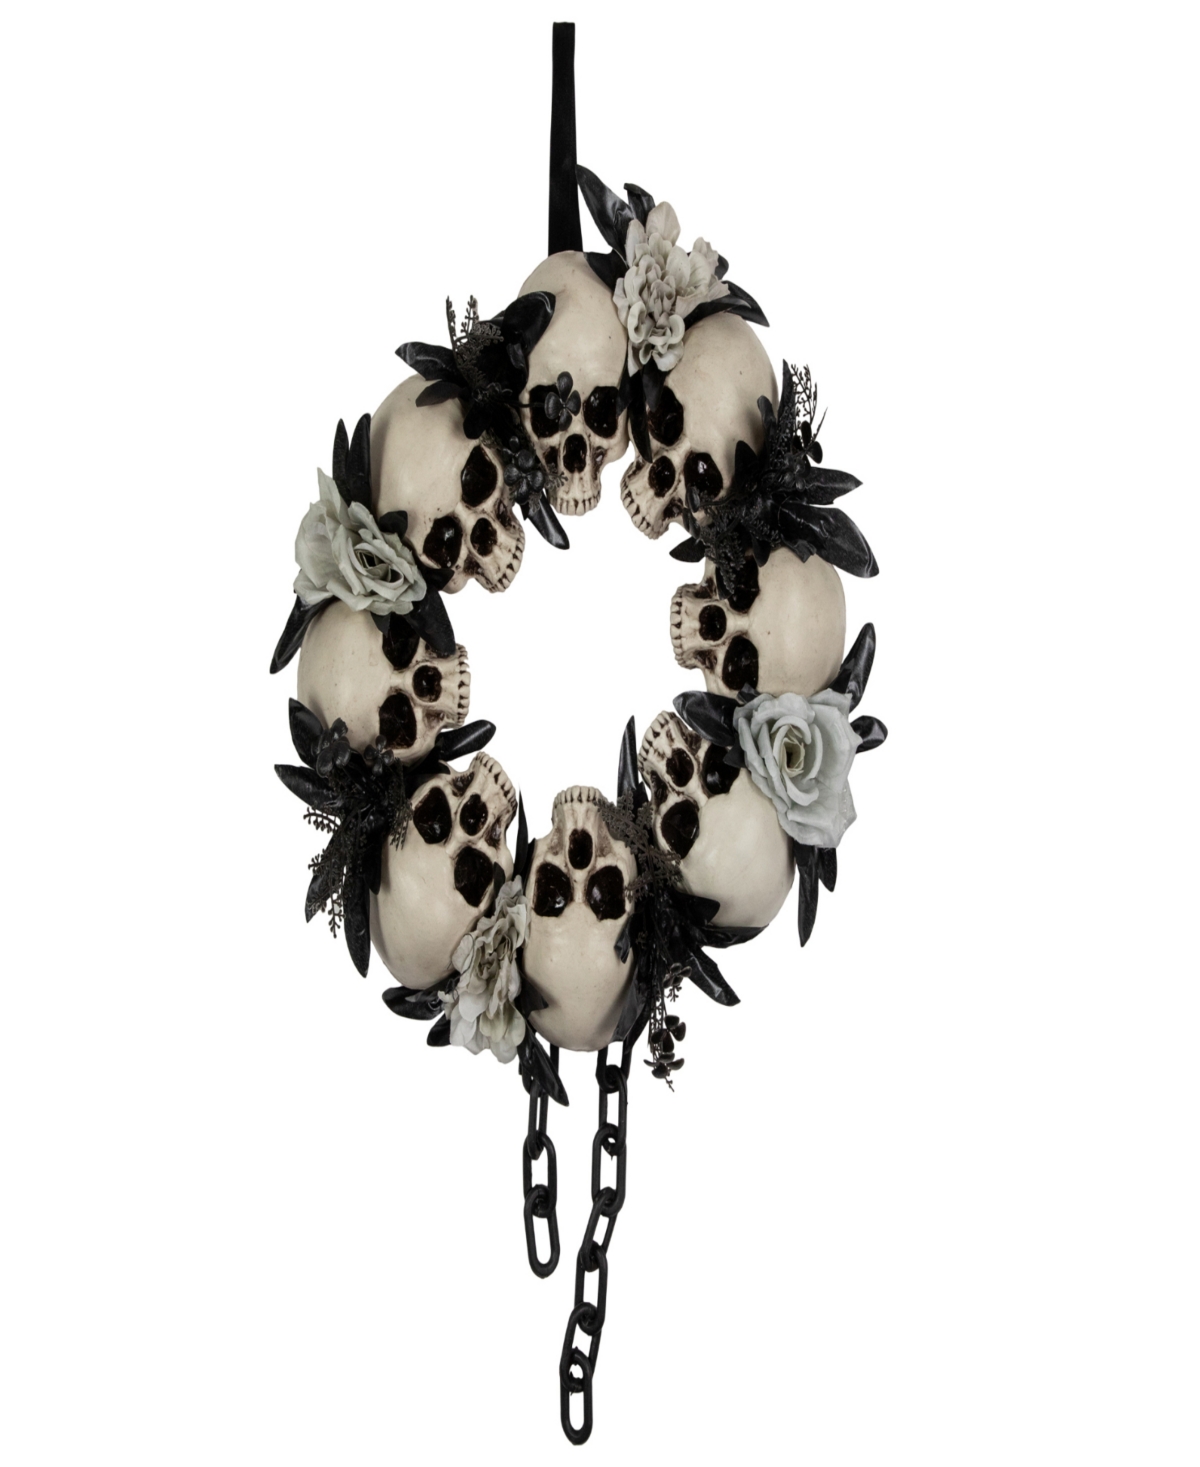 Northlight Skulls And Chains With Roses Halloween Wreath, 15" Unlit In Gray